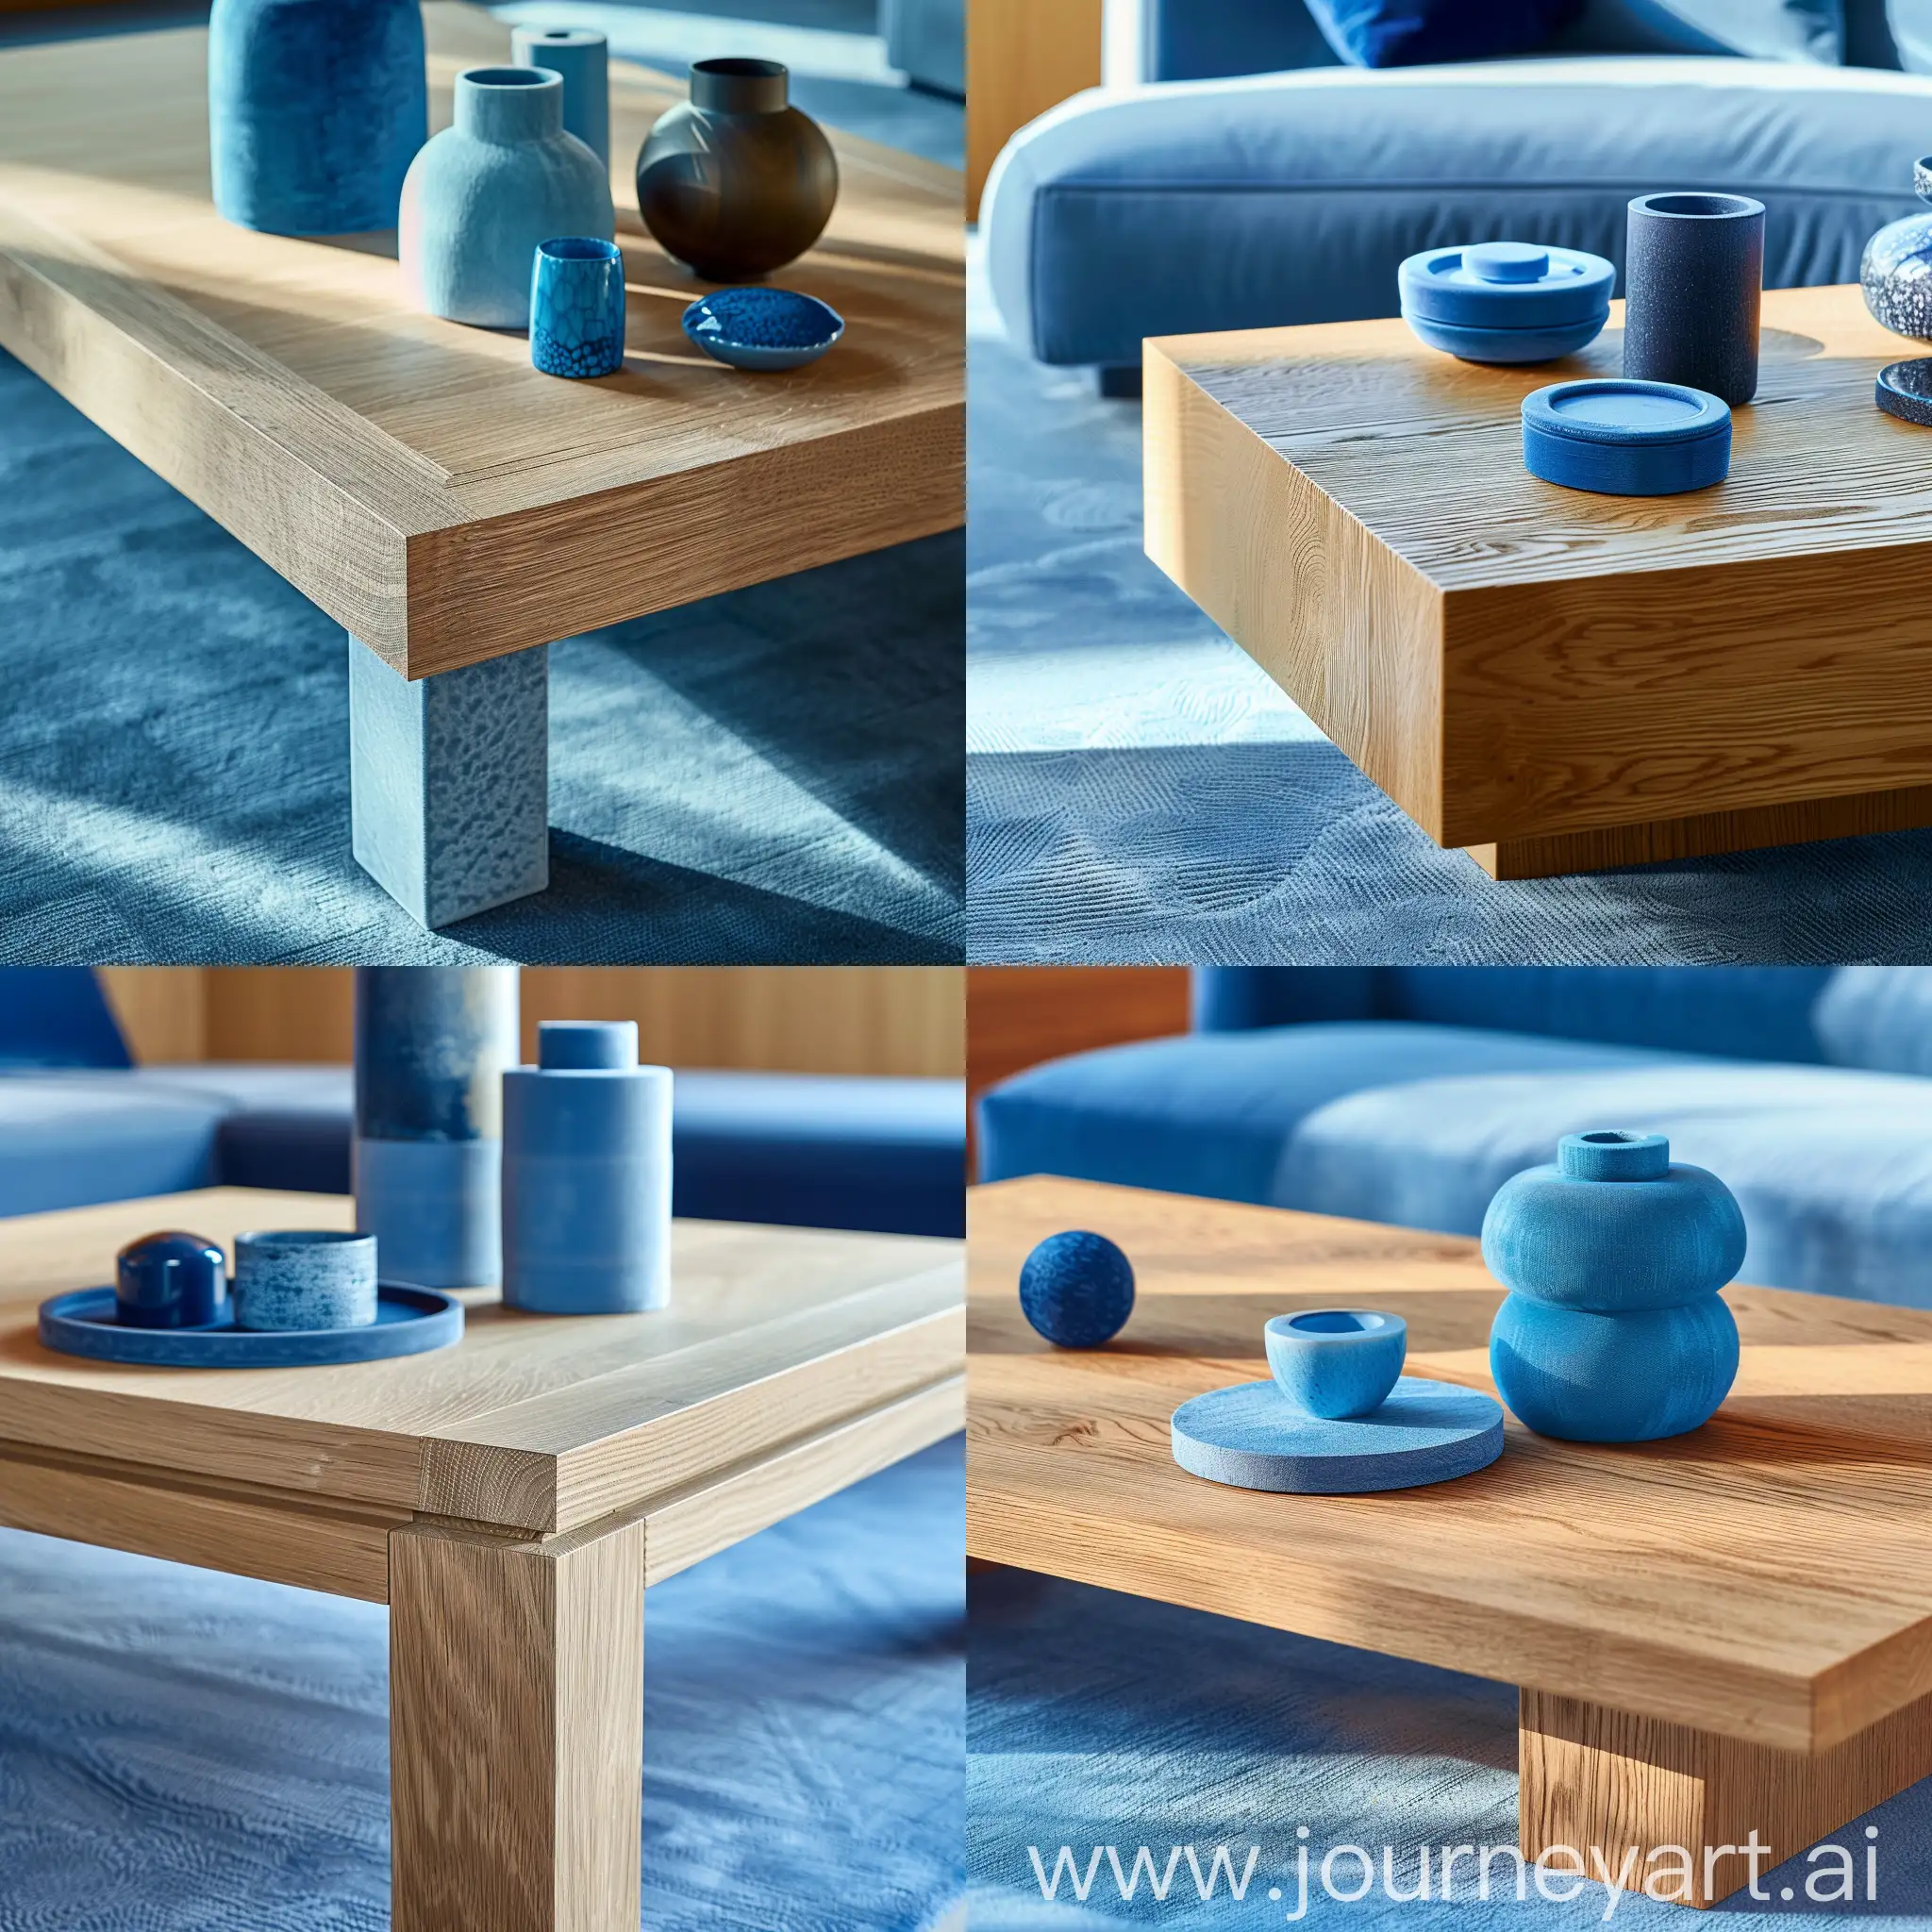 Modern-Oak-Coffee-Table-with-Blue-Accessories-and-Morning-Light